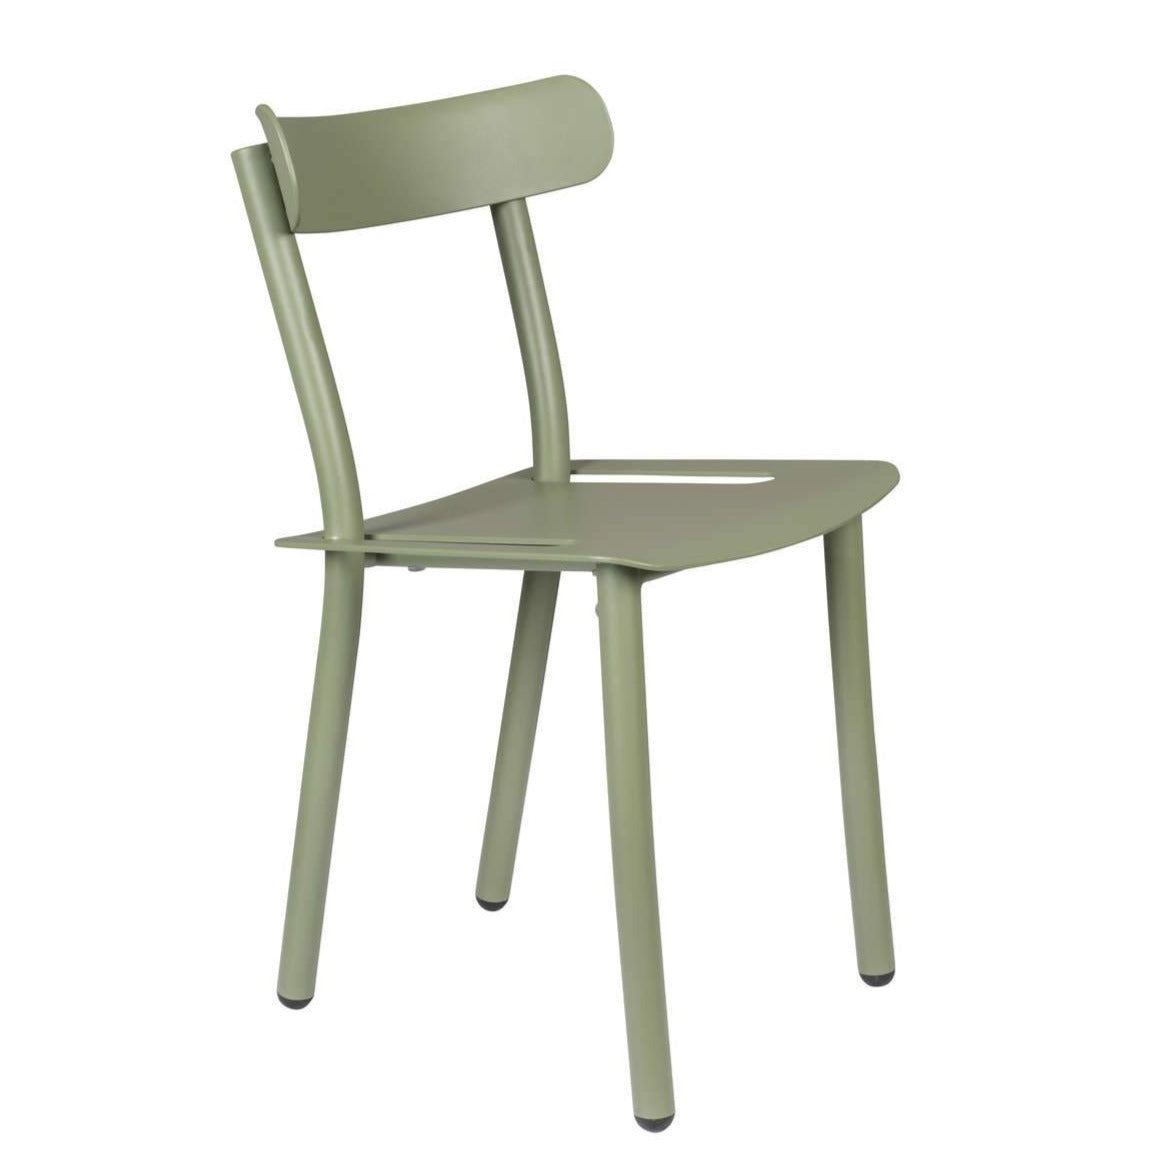 Friday is a modern version of the bistro chair made of aluminum, which combines the features of modern furniture and vintage. It works perfectly not only in the dining room, but also in the office and on the terrace.